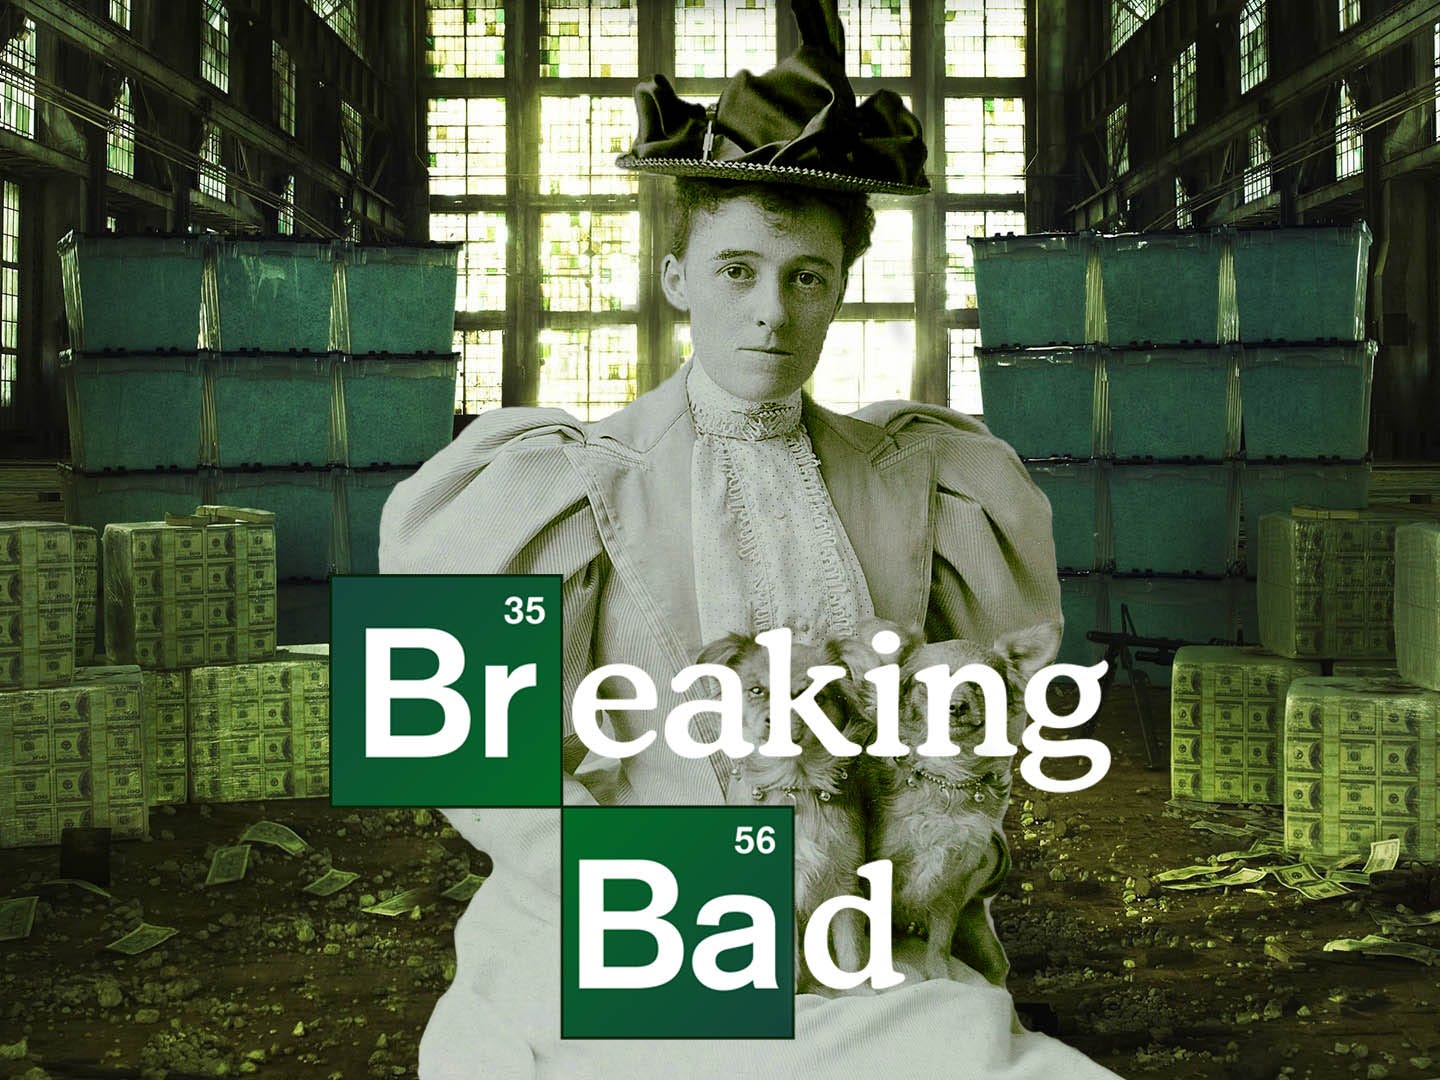 A promo photo from the show Breaking Bad, but Edith Wharton has been photoshopped in to replace Walter White